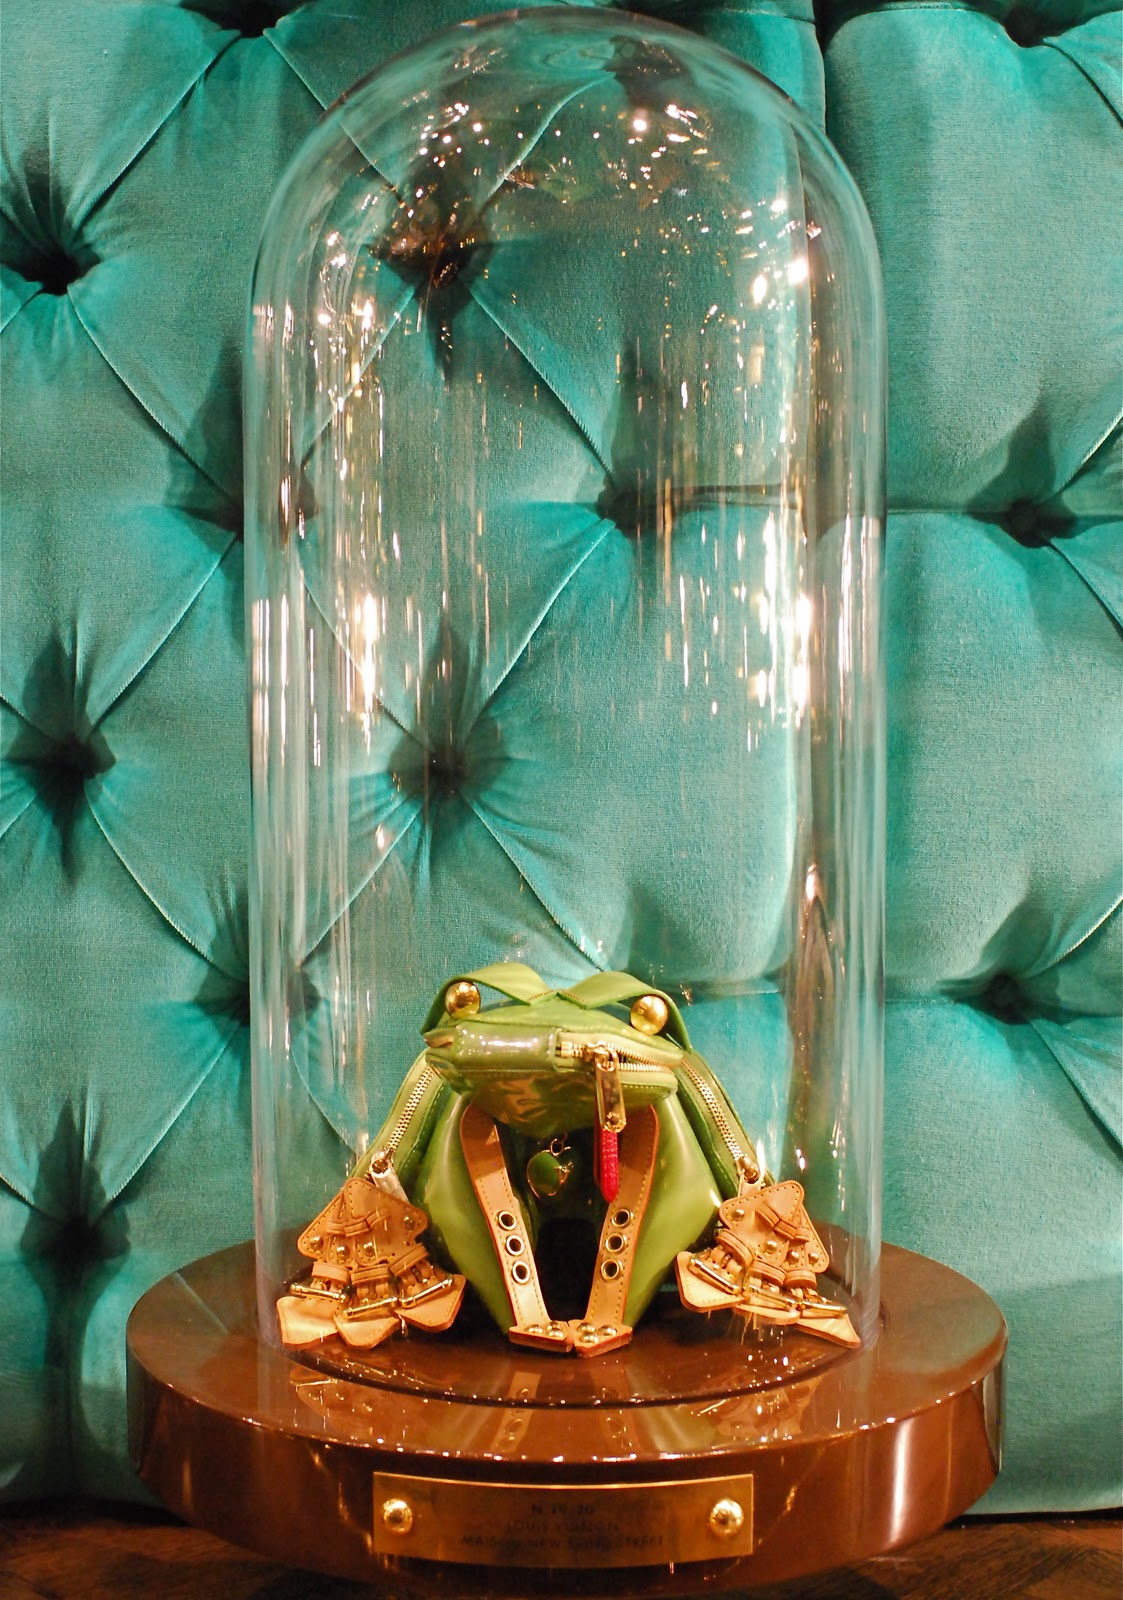 NYC ♥ NYC: Louis Vuitton Fifth Avenue Flagship Store Window Display - All Creatures Great And Small